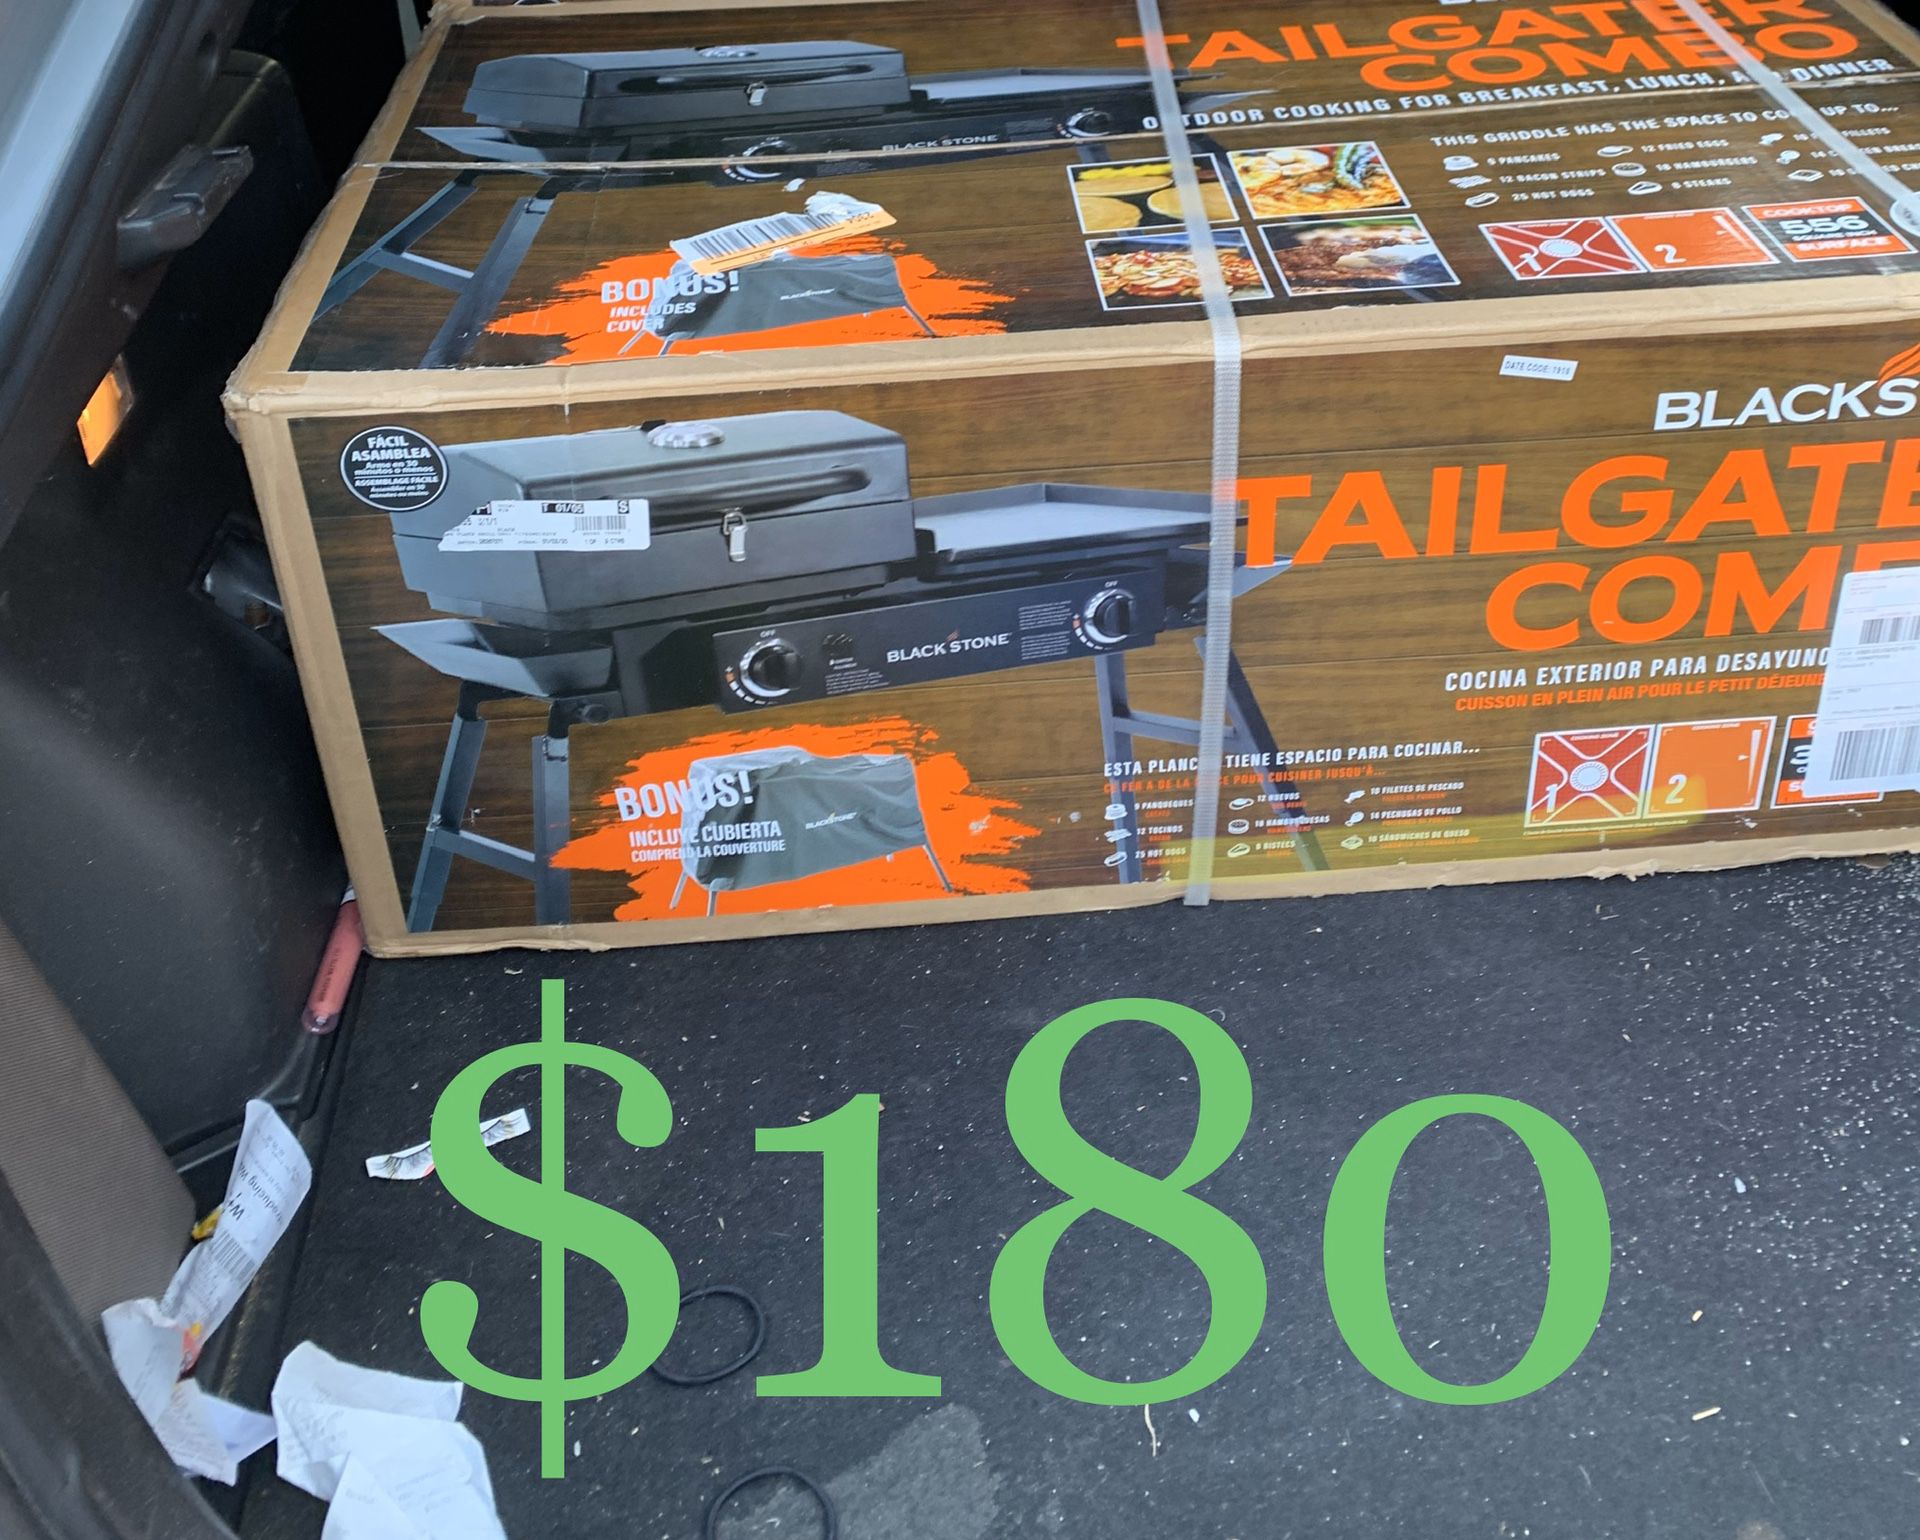 Tailgate grill originally $280 asking only $180! I’m moving to AZ Friday